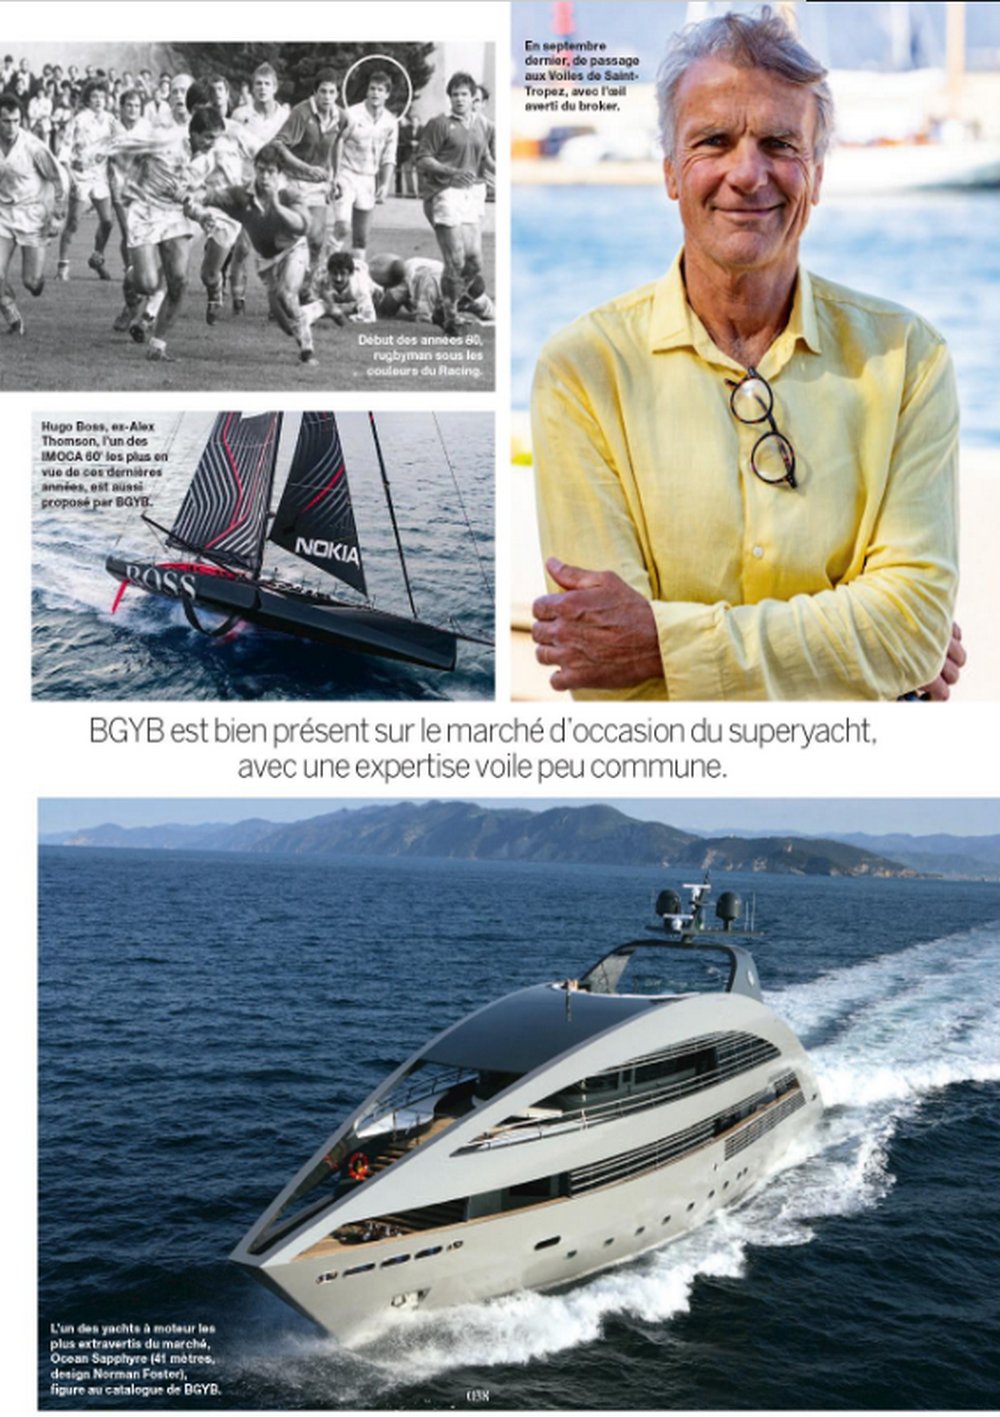 Boat Heroes Magazine presents the atypical career of Bernard Gallay, founder of BGYB